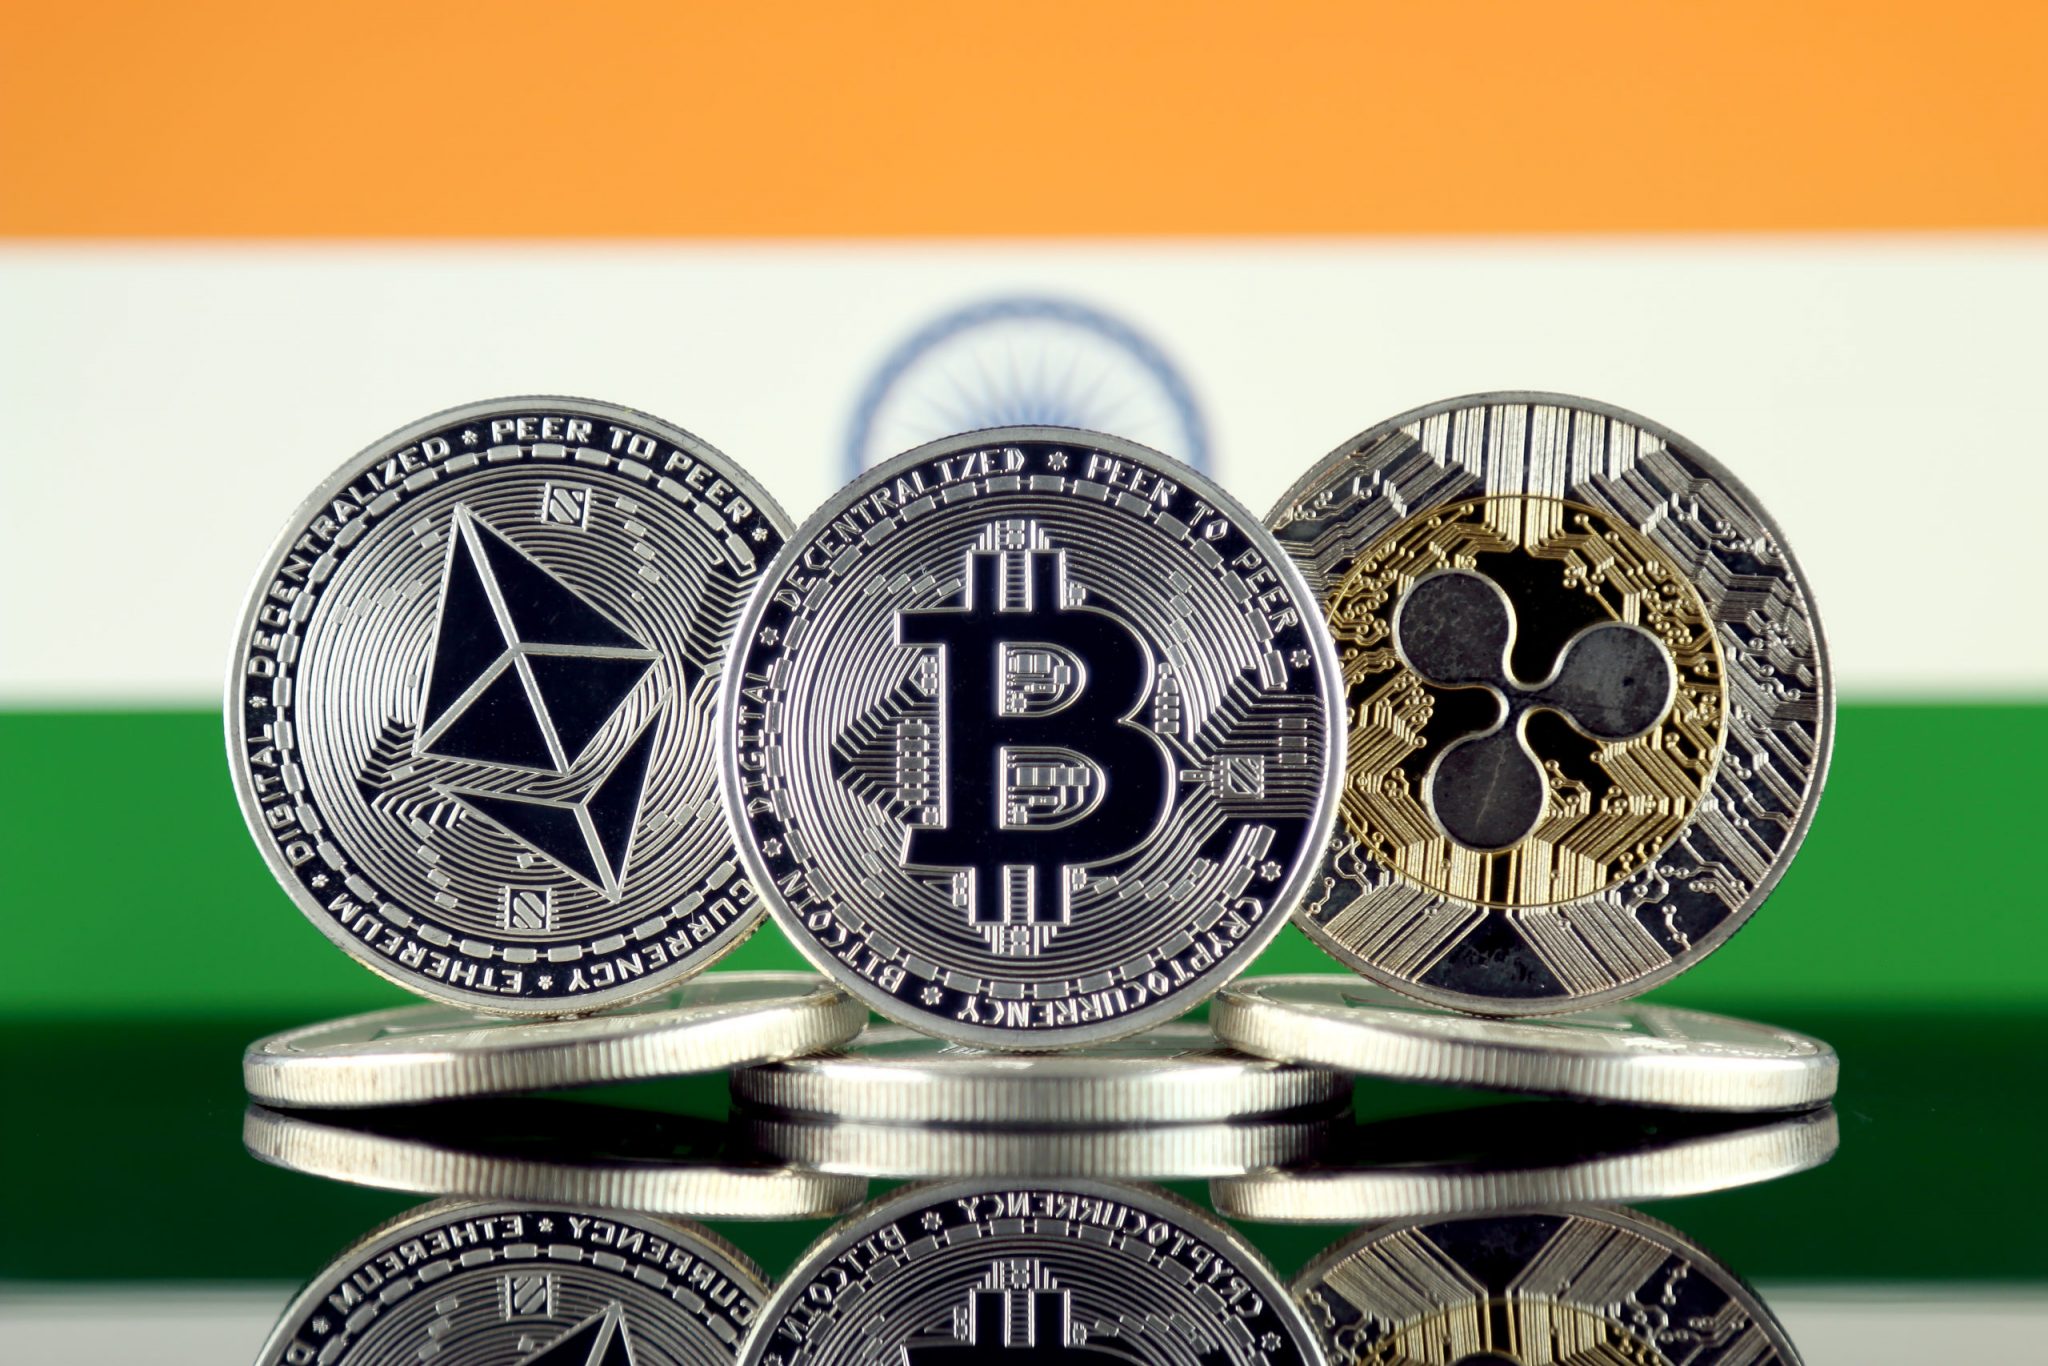 india on cryptocurrency latest news